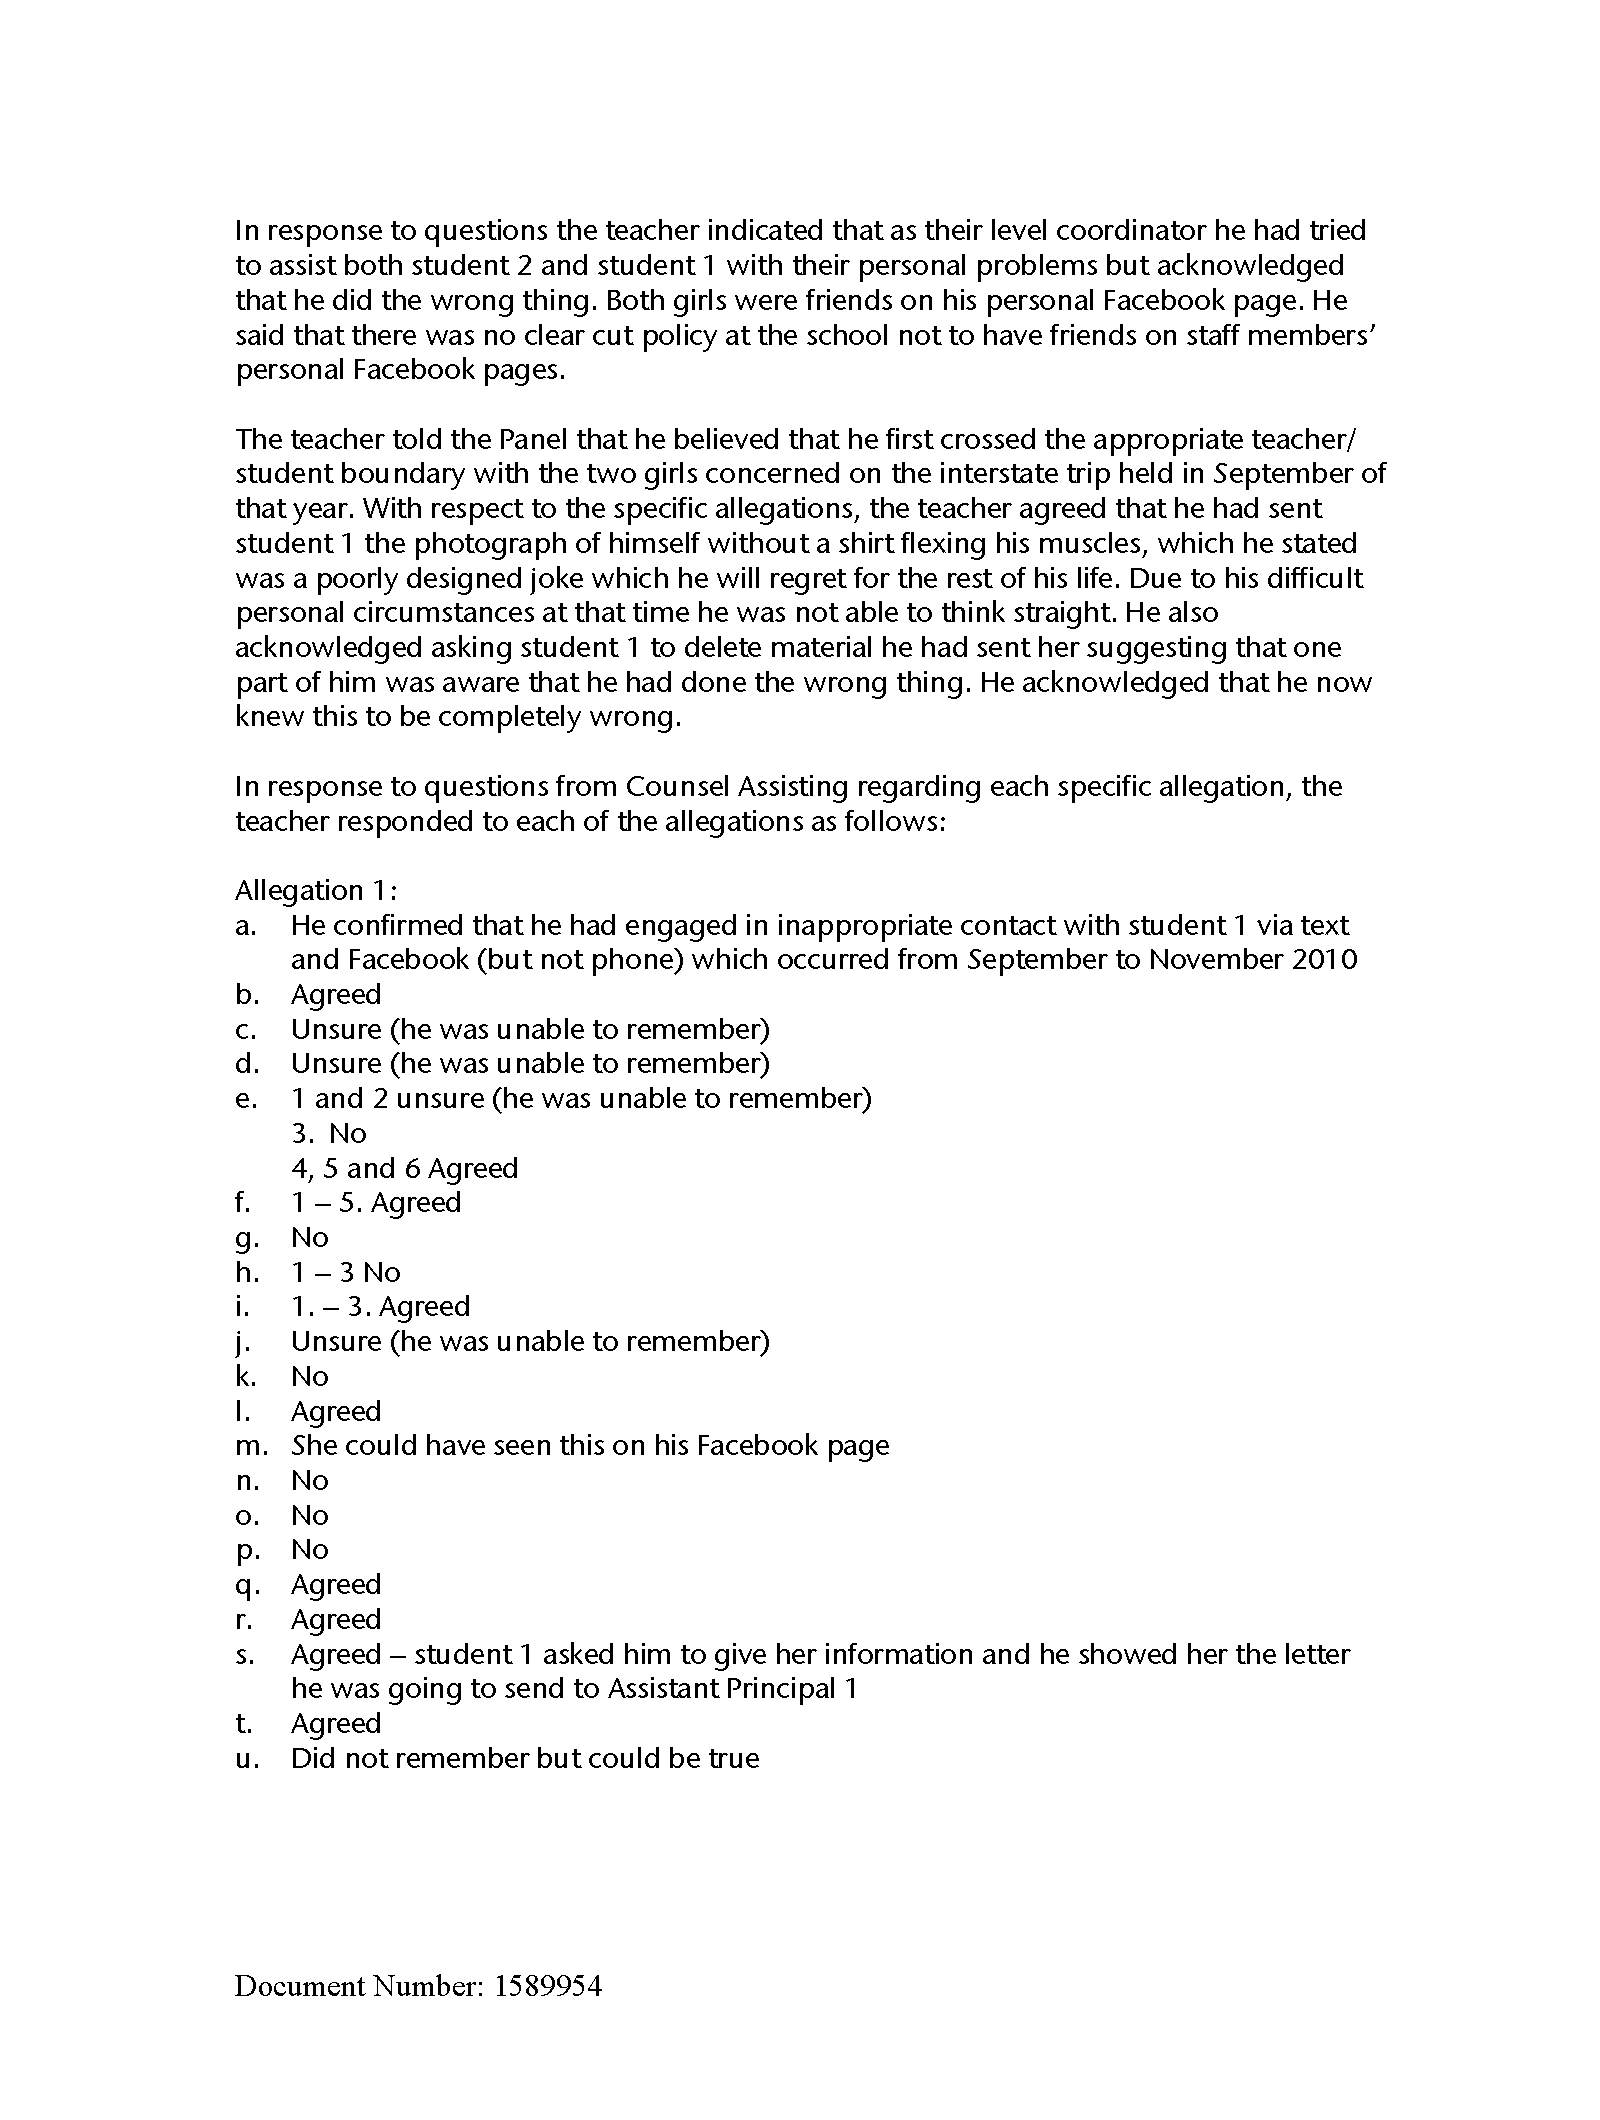 Copy of SanitisedPleydellDecision08.png